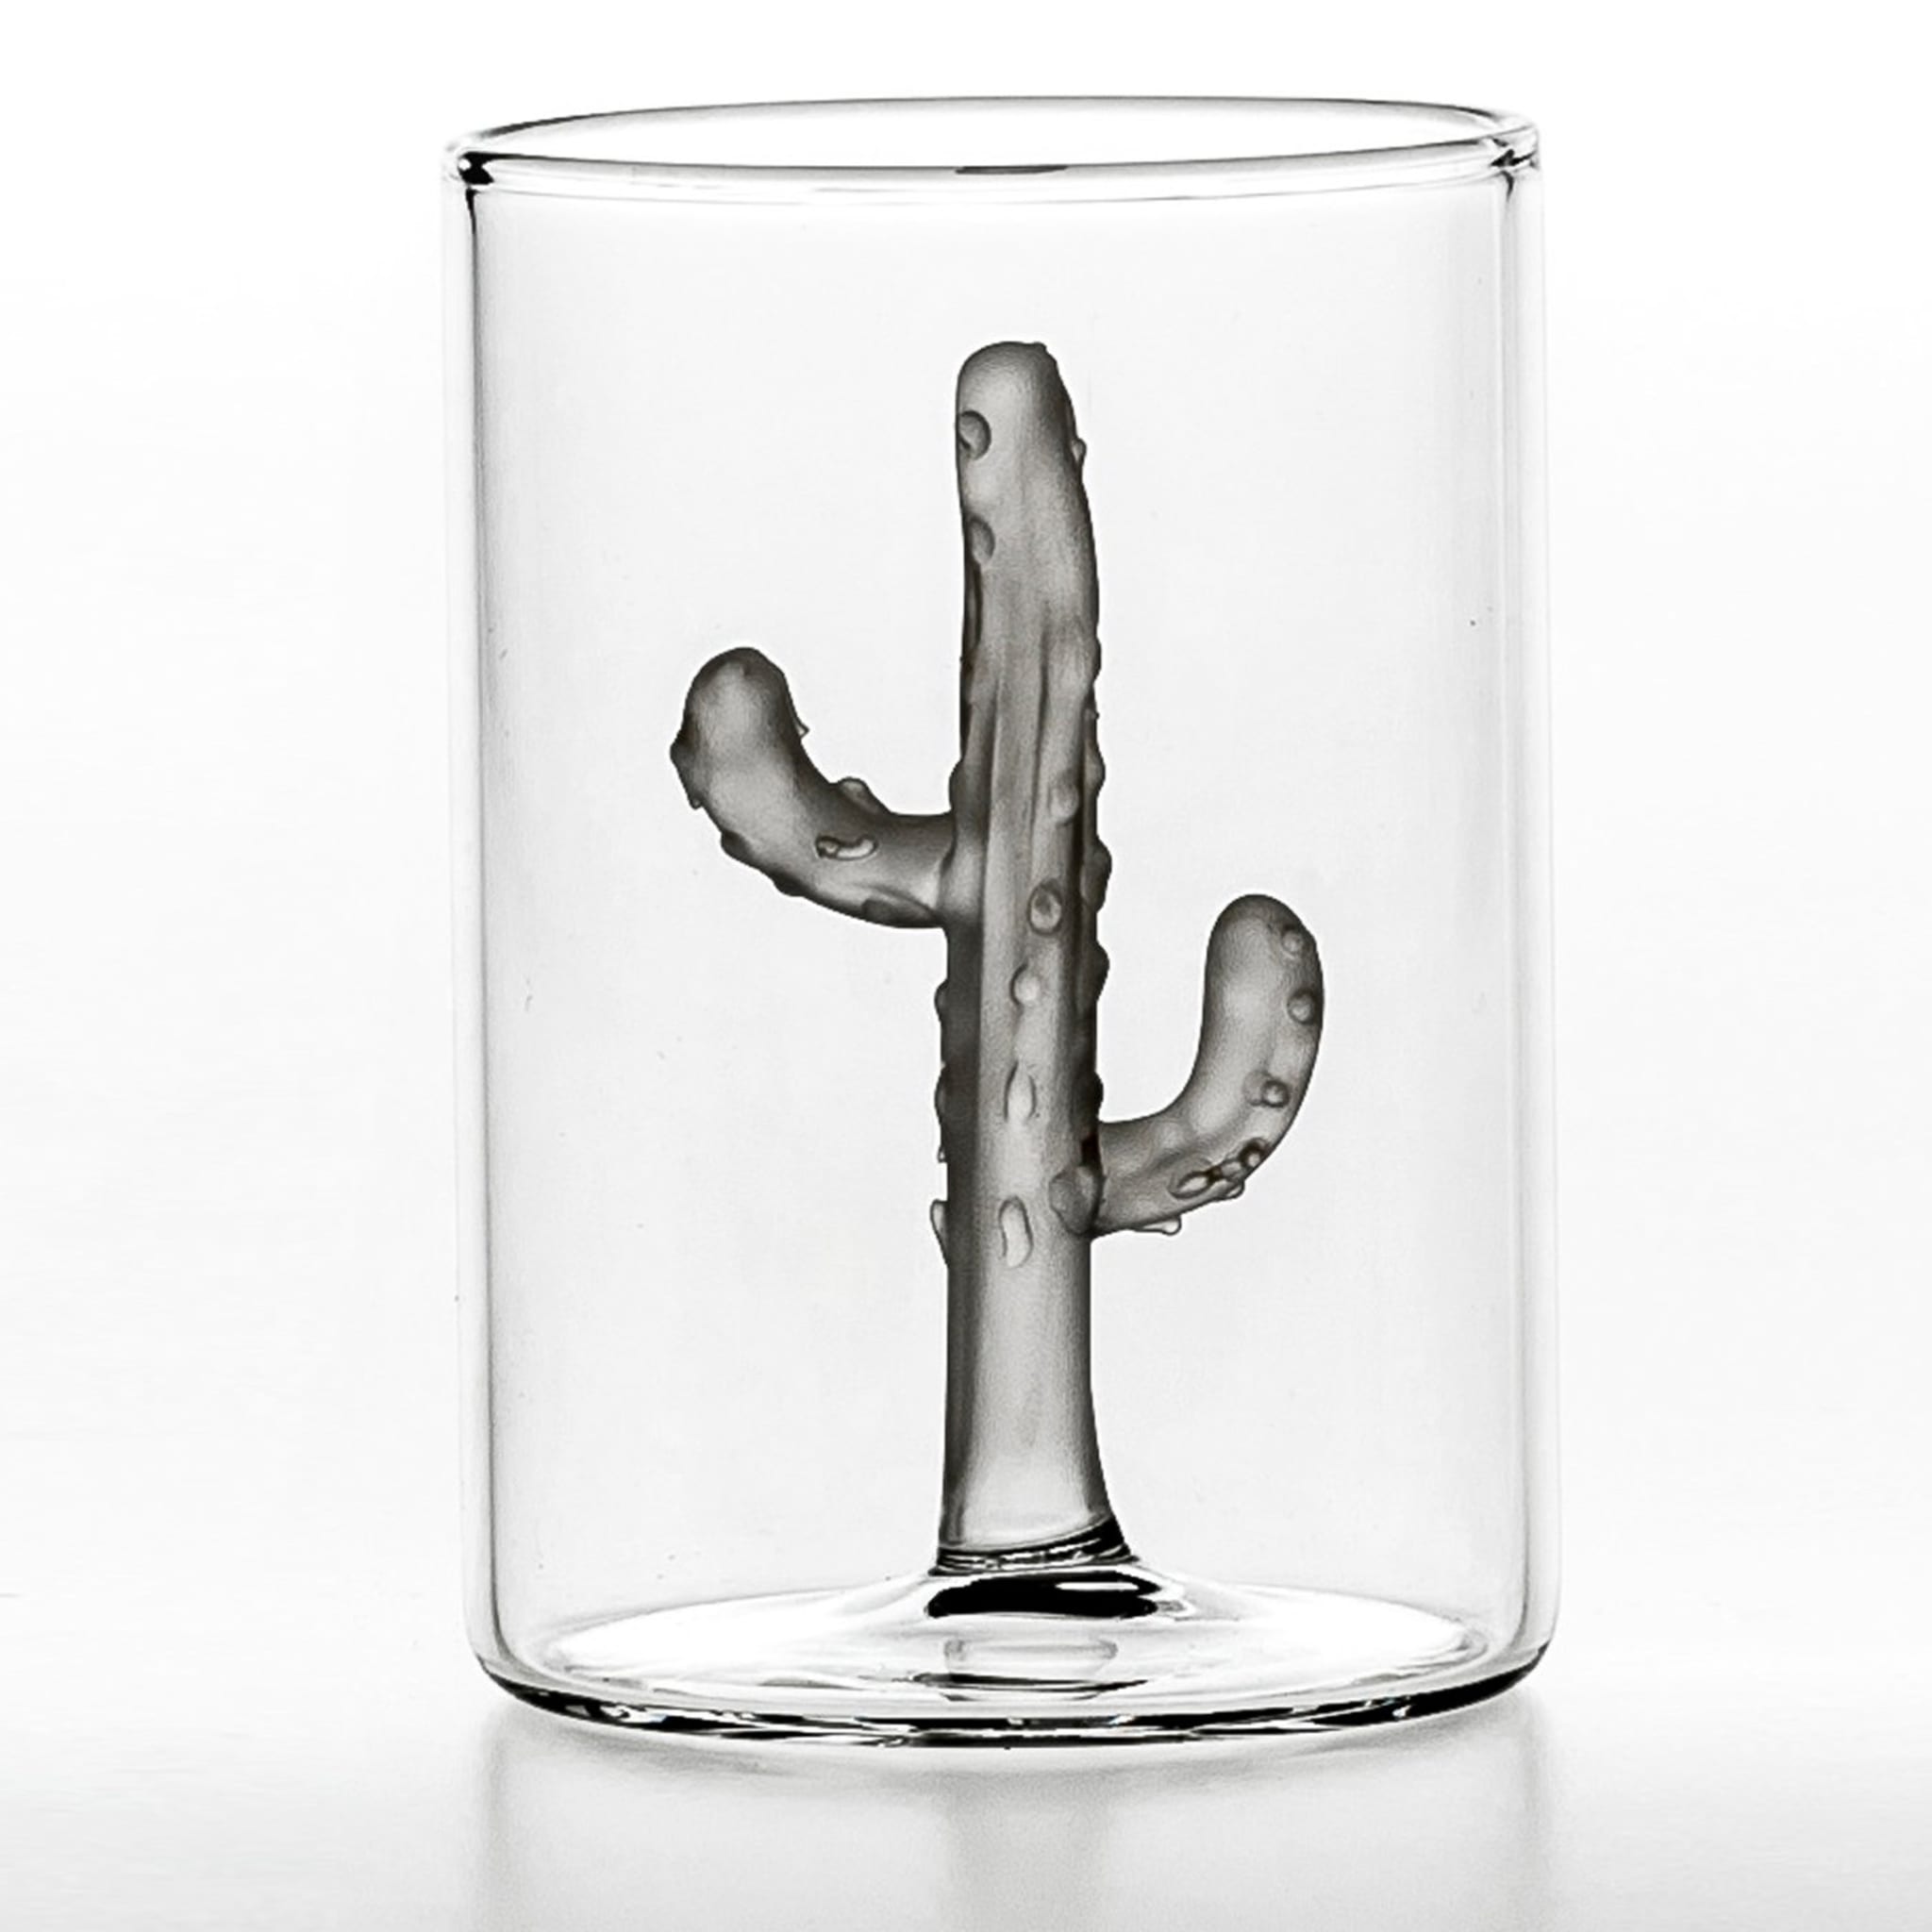 Set of 4 Glasses and 1 Jug Cactus Collection - Alternative view 2